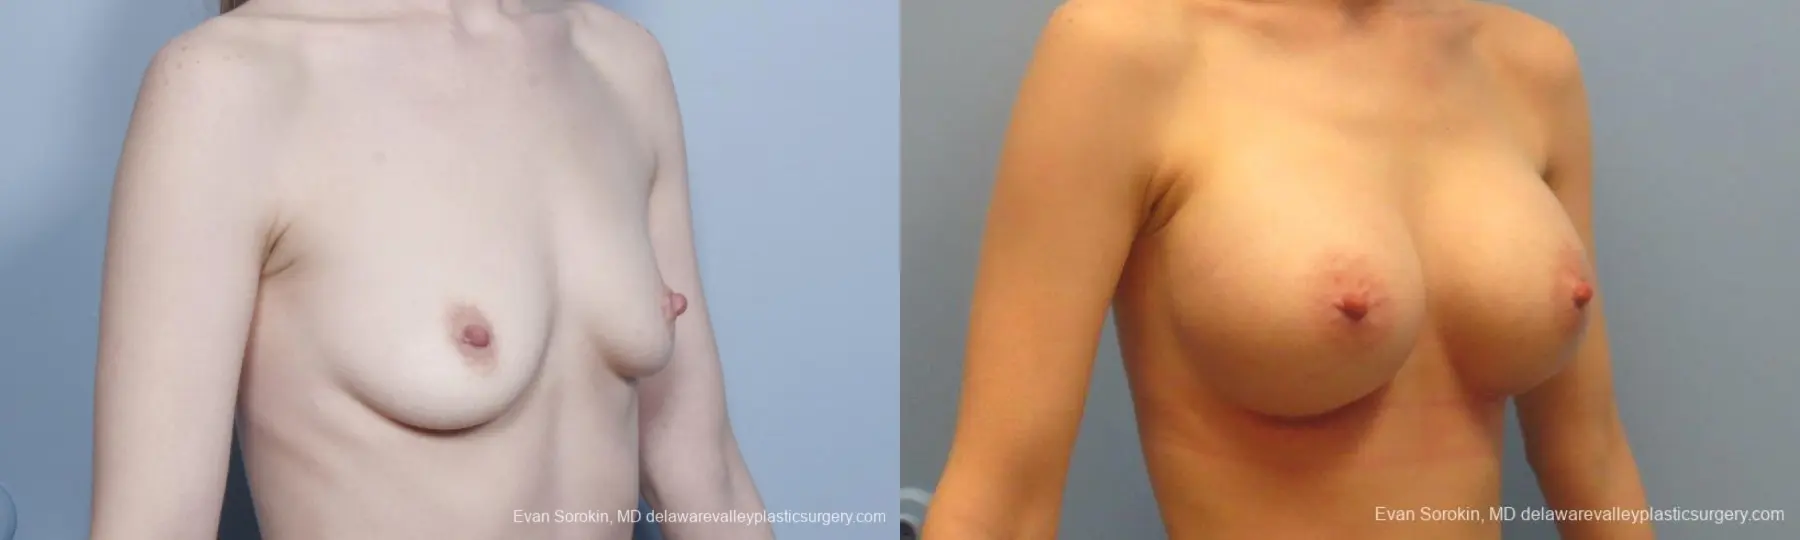 Philadelphia Breast Augmentation 8781 - Before and After 2